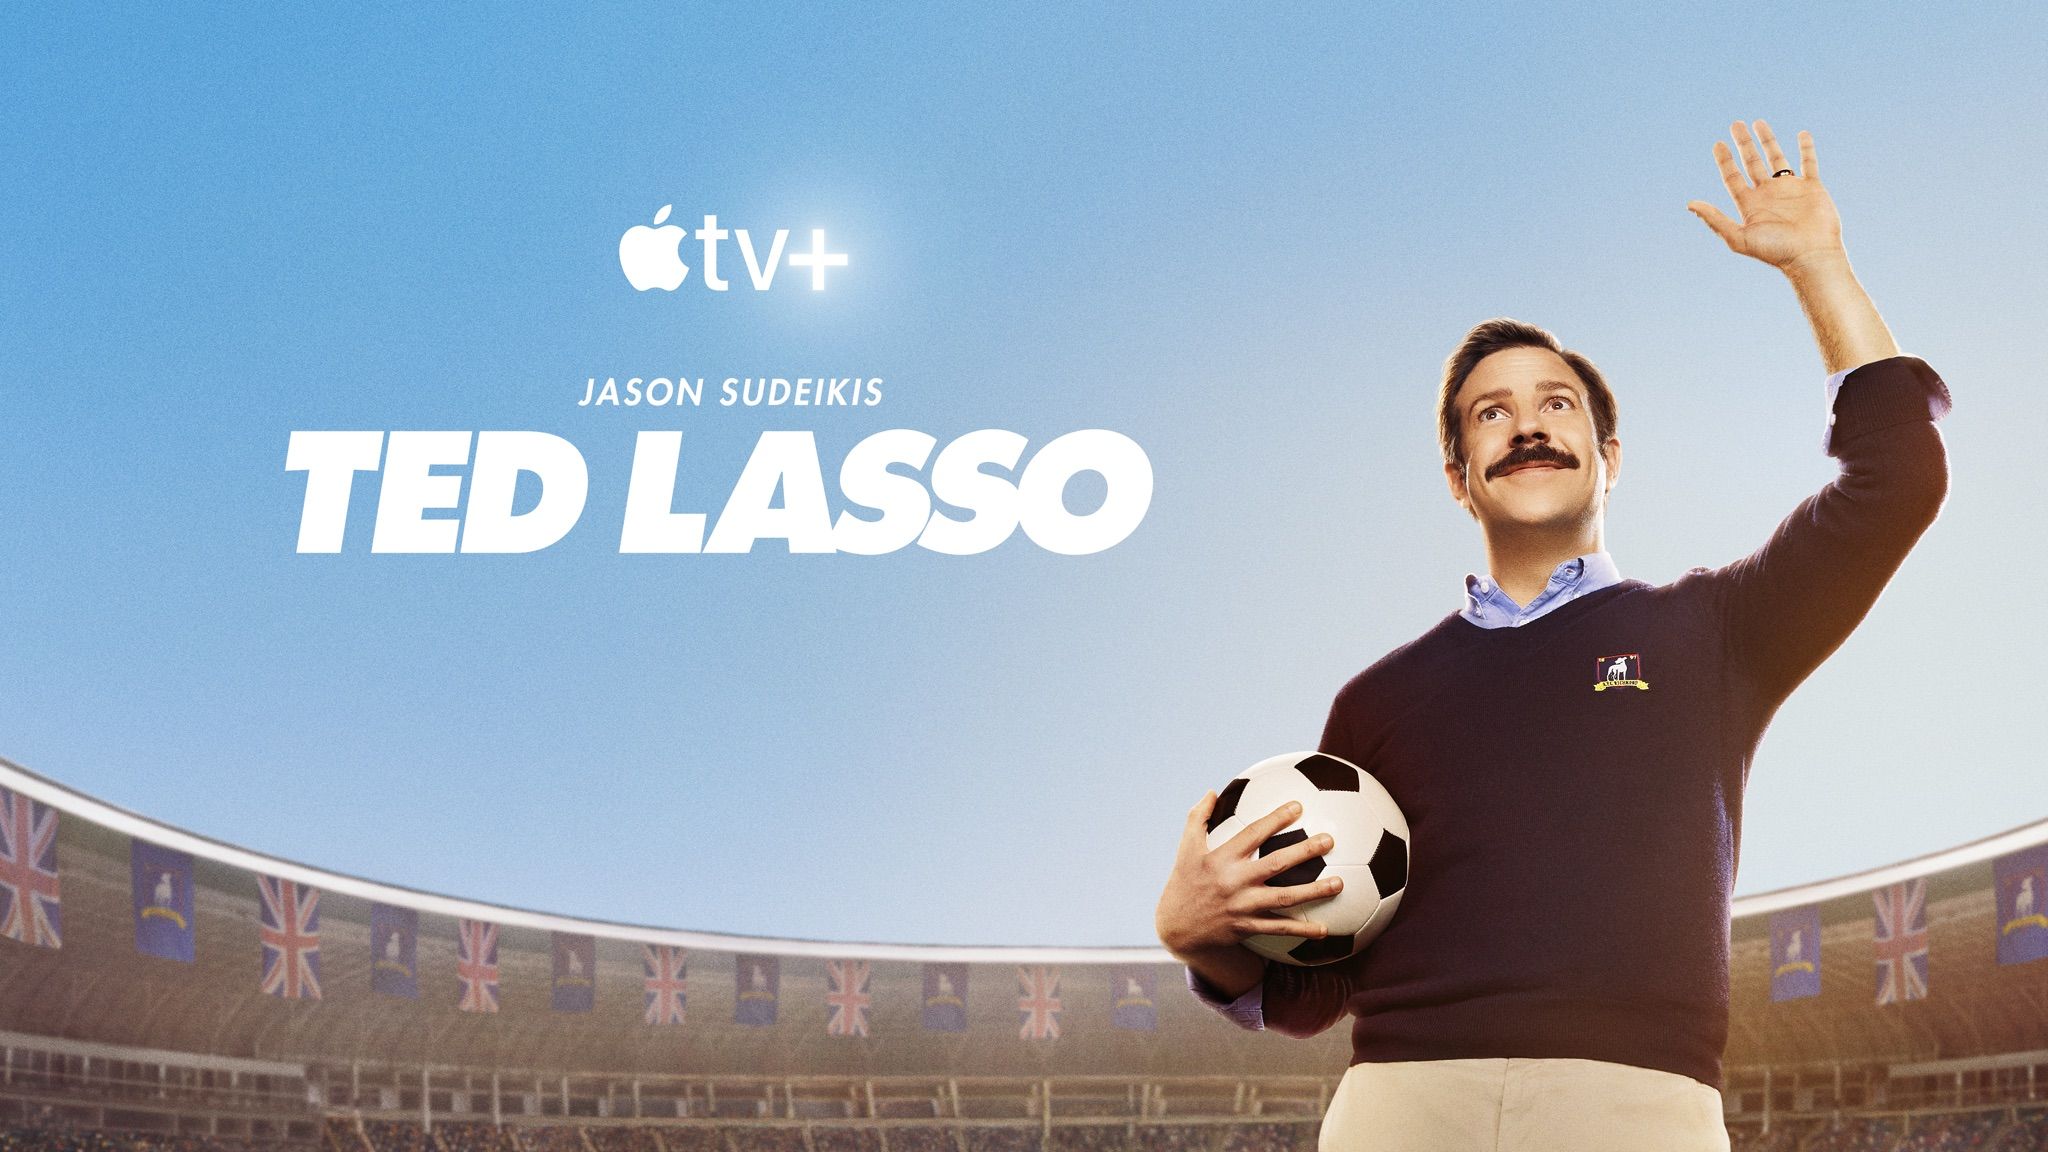 Ted Lasso' has been renewed for a second season at Apple TV+